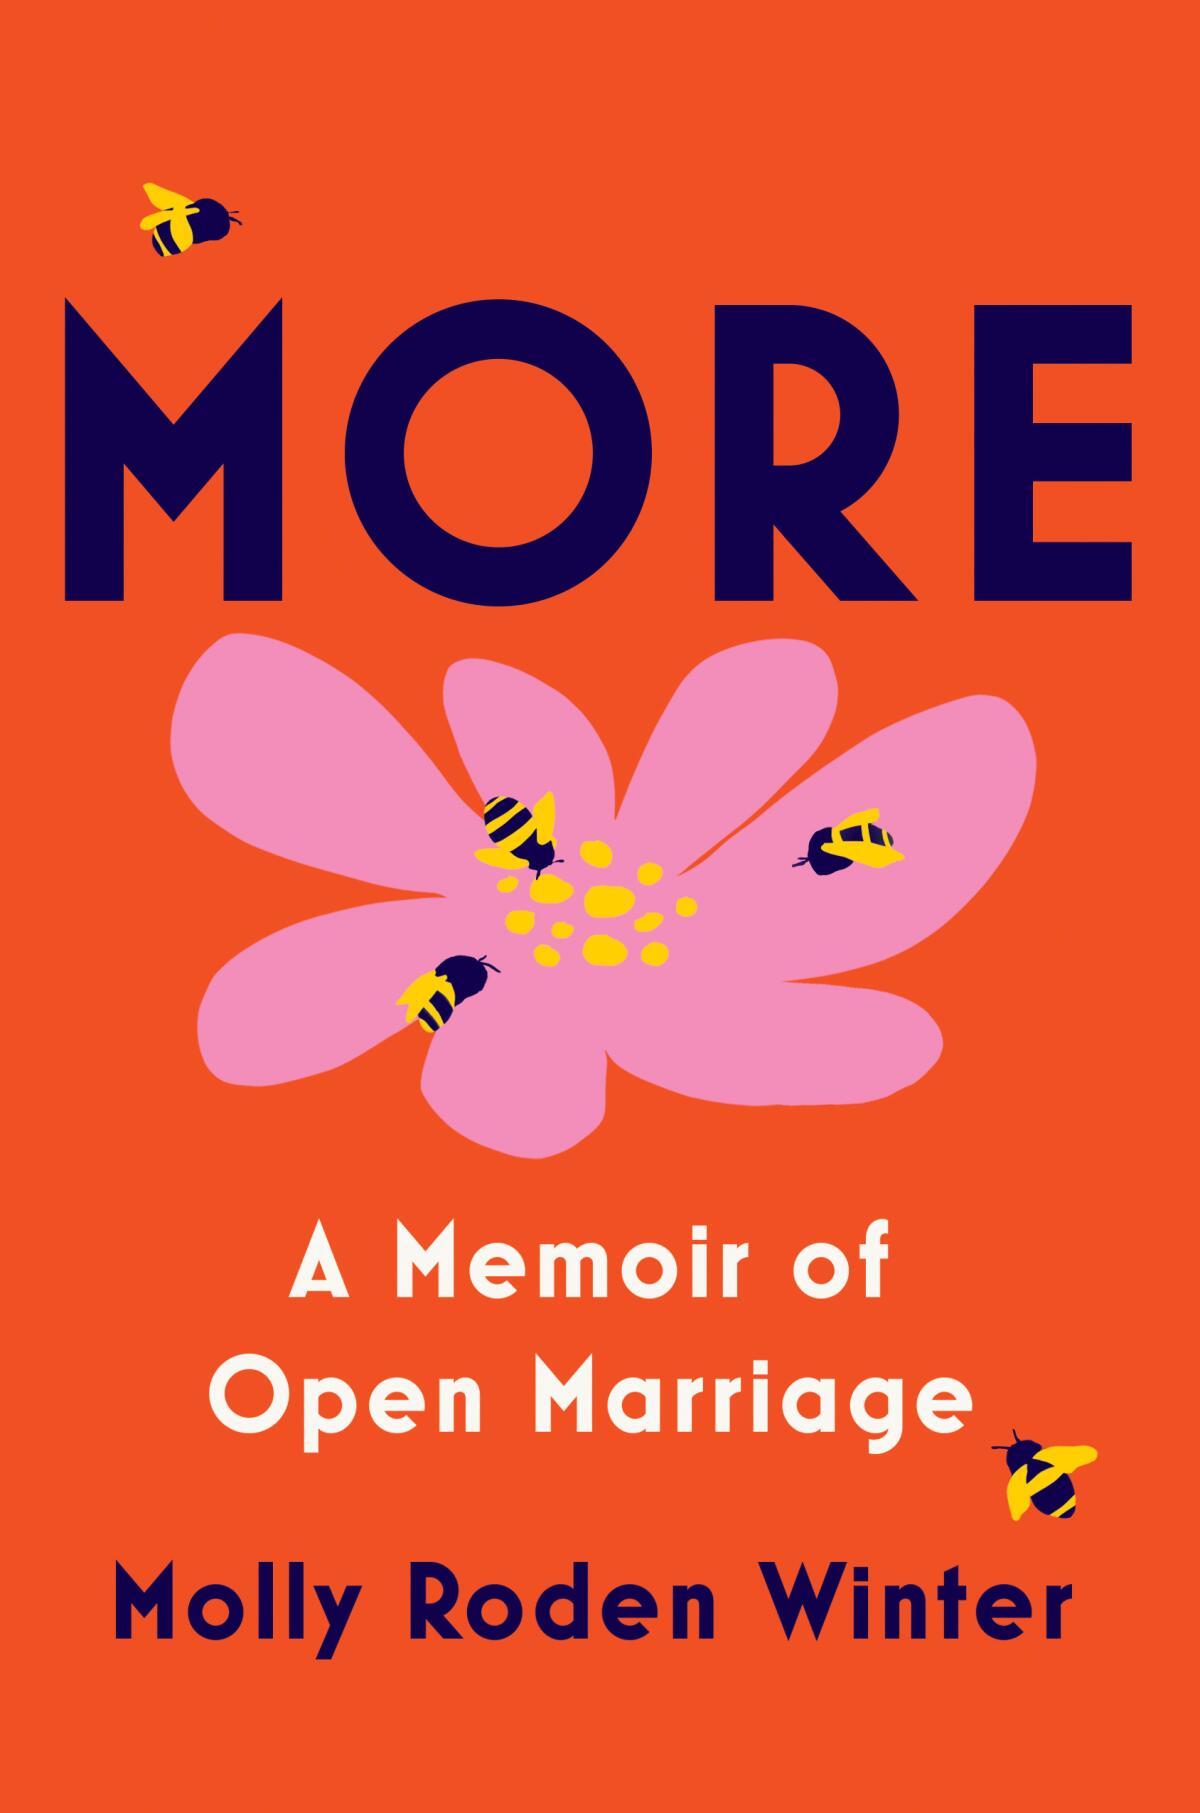 "More: A Memoir of Open Marriage" by Molly Roden Winter